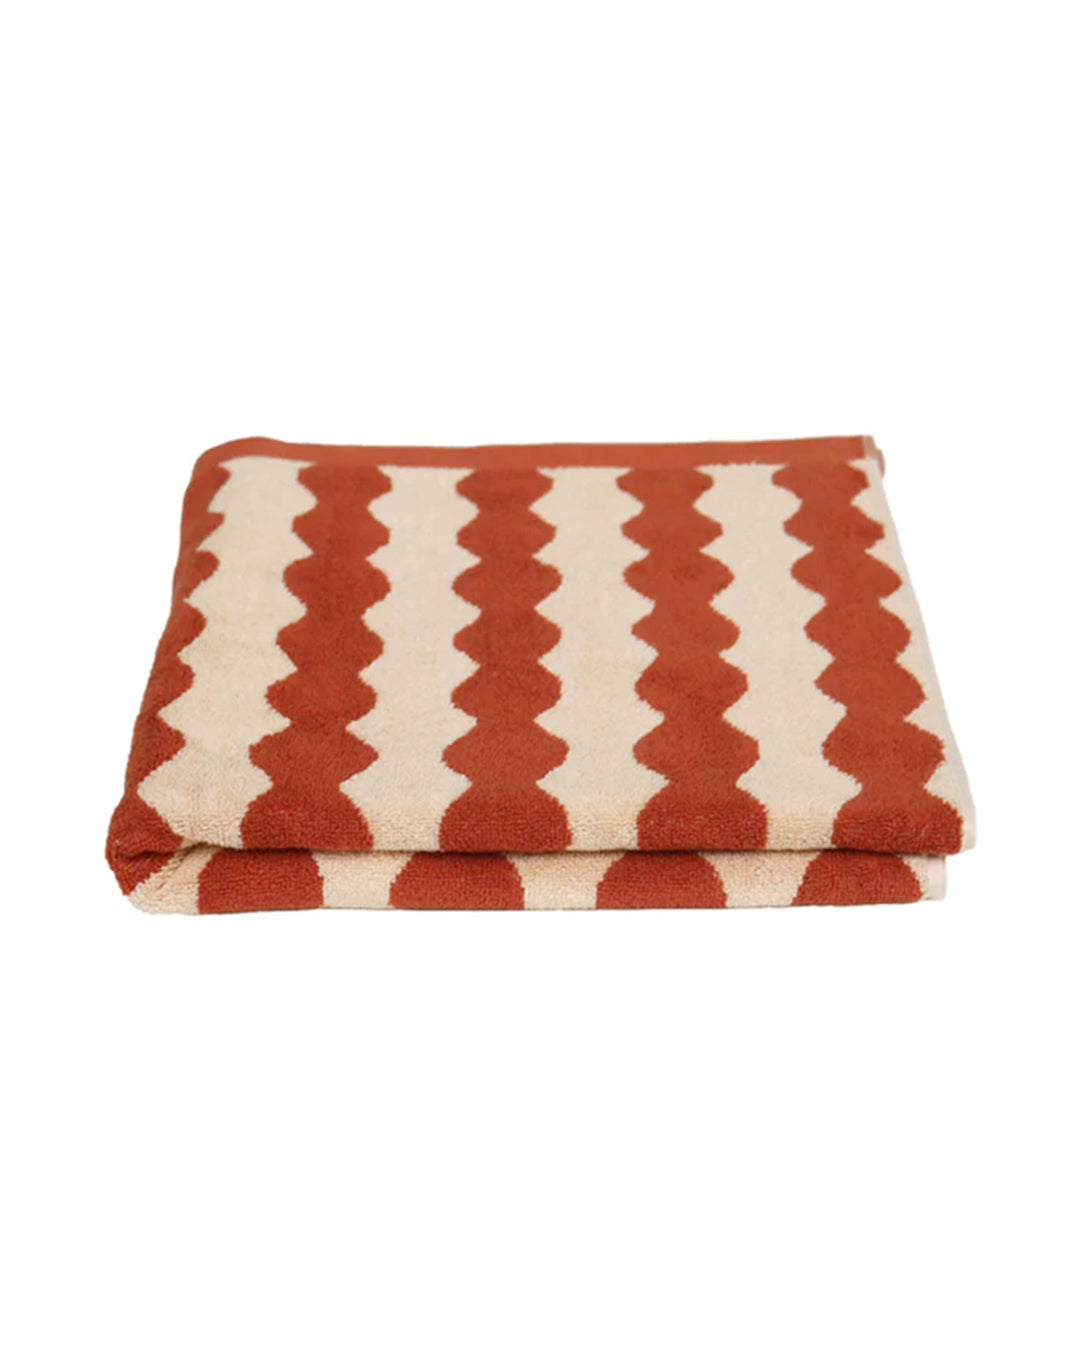 The Wiggle bath towel is the perfect print to bring a fun vibe to your bathroom. This graphic print in rust and peach suits your kids energy levels at bath time. Meticulously crafted for luxury, these ultra-plush towels are made from 100% organic cotton for the dreamiest feel against your kids delicate skin.